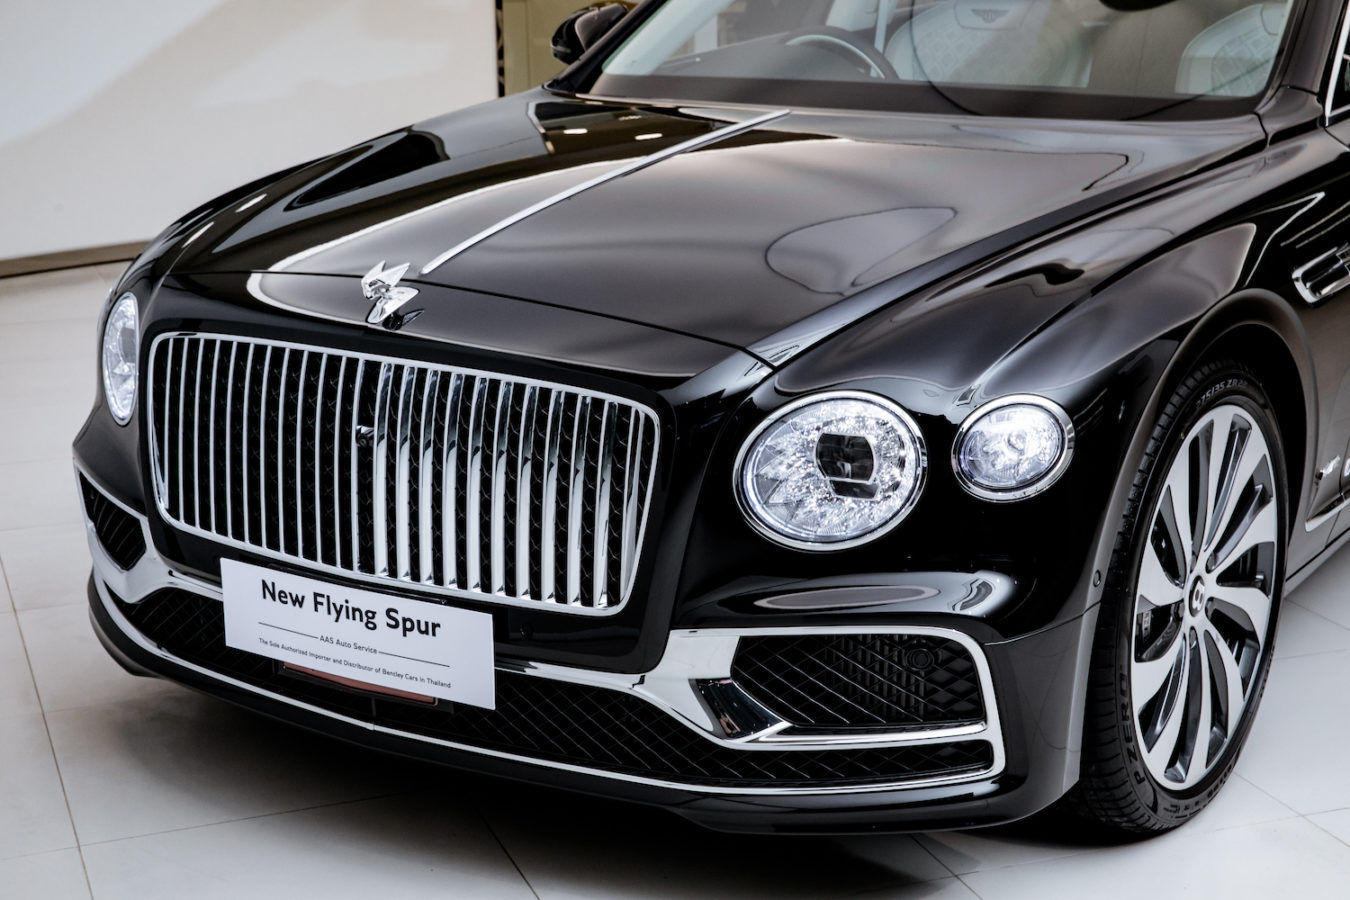 BurdaLuxury’s Lead Generation Campaign The Bentley Flying Spur